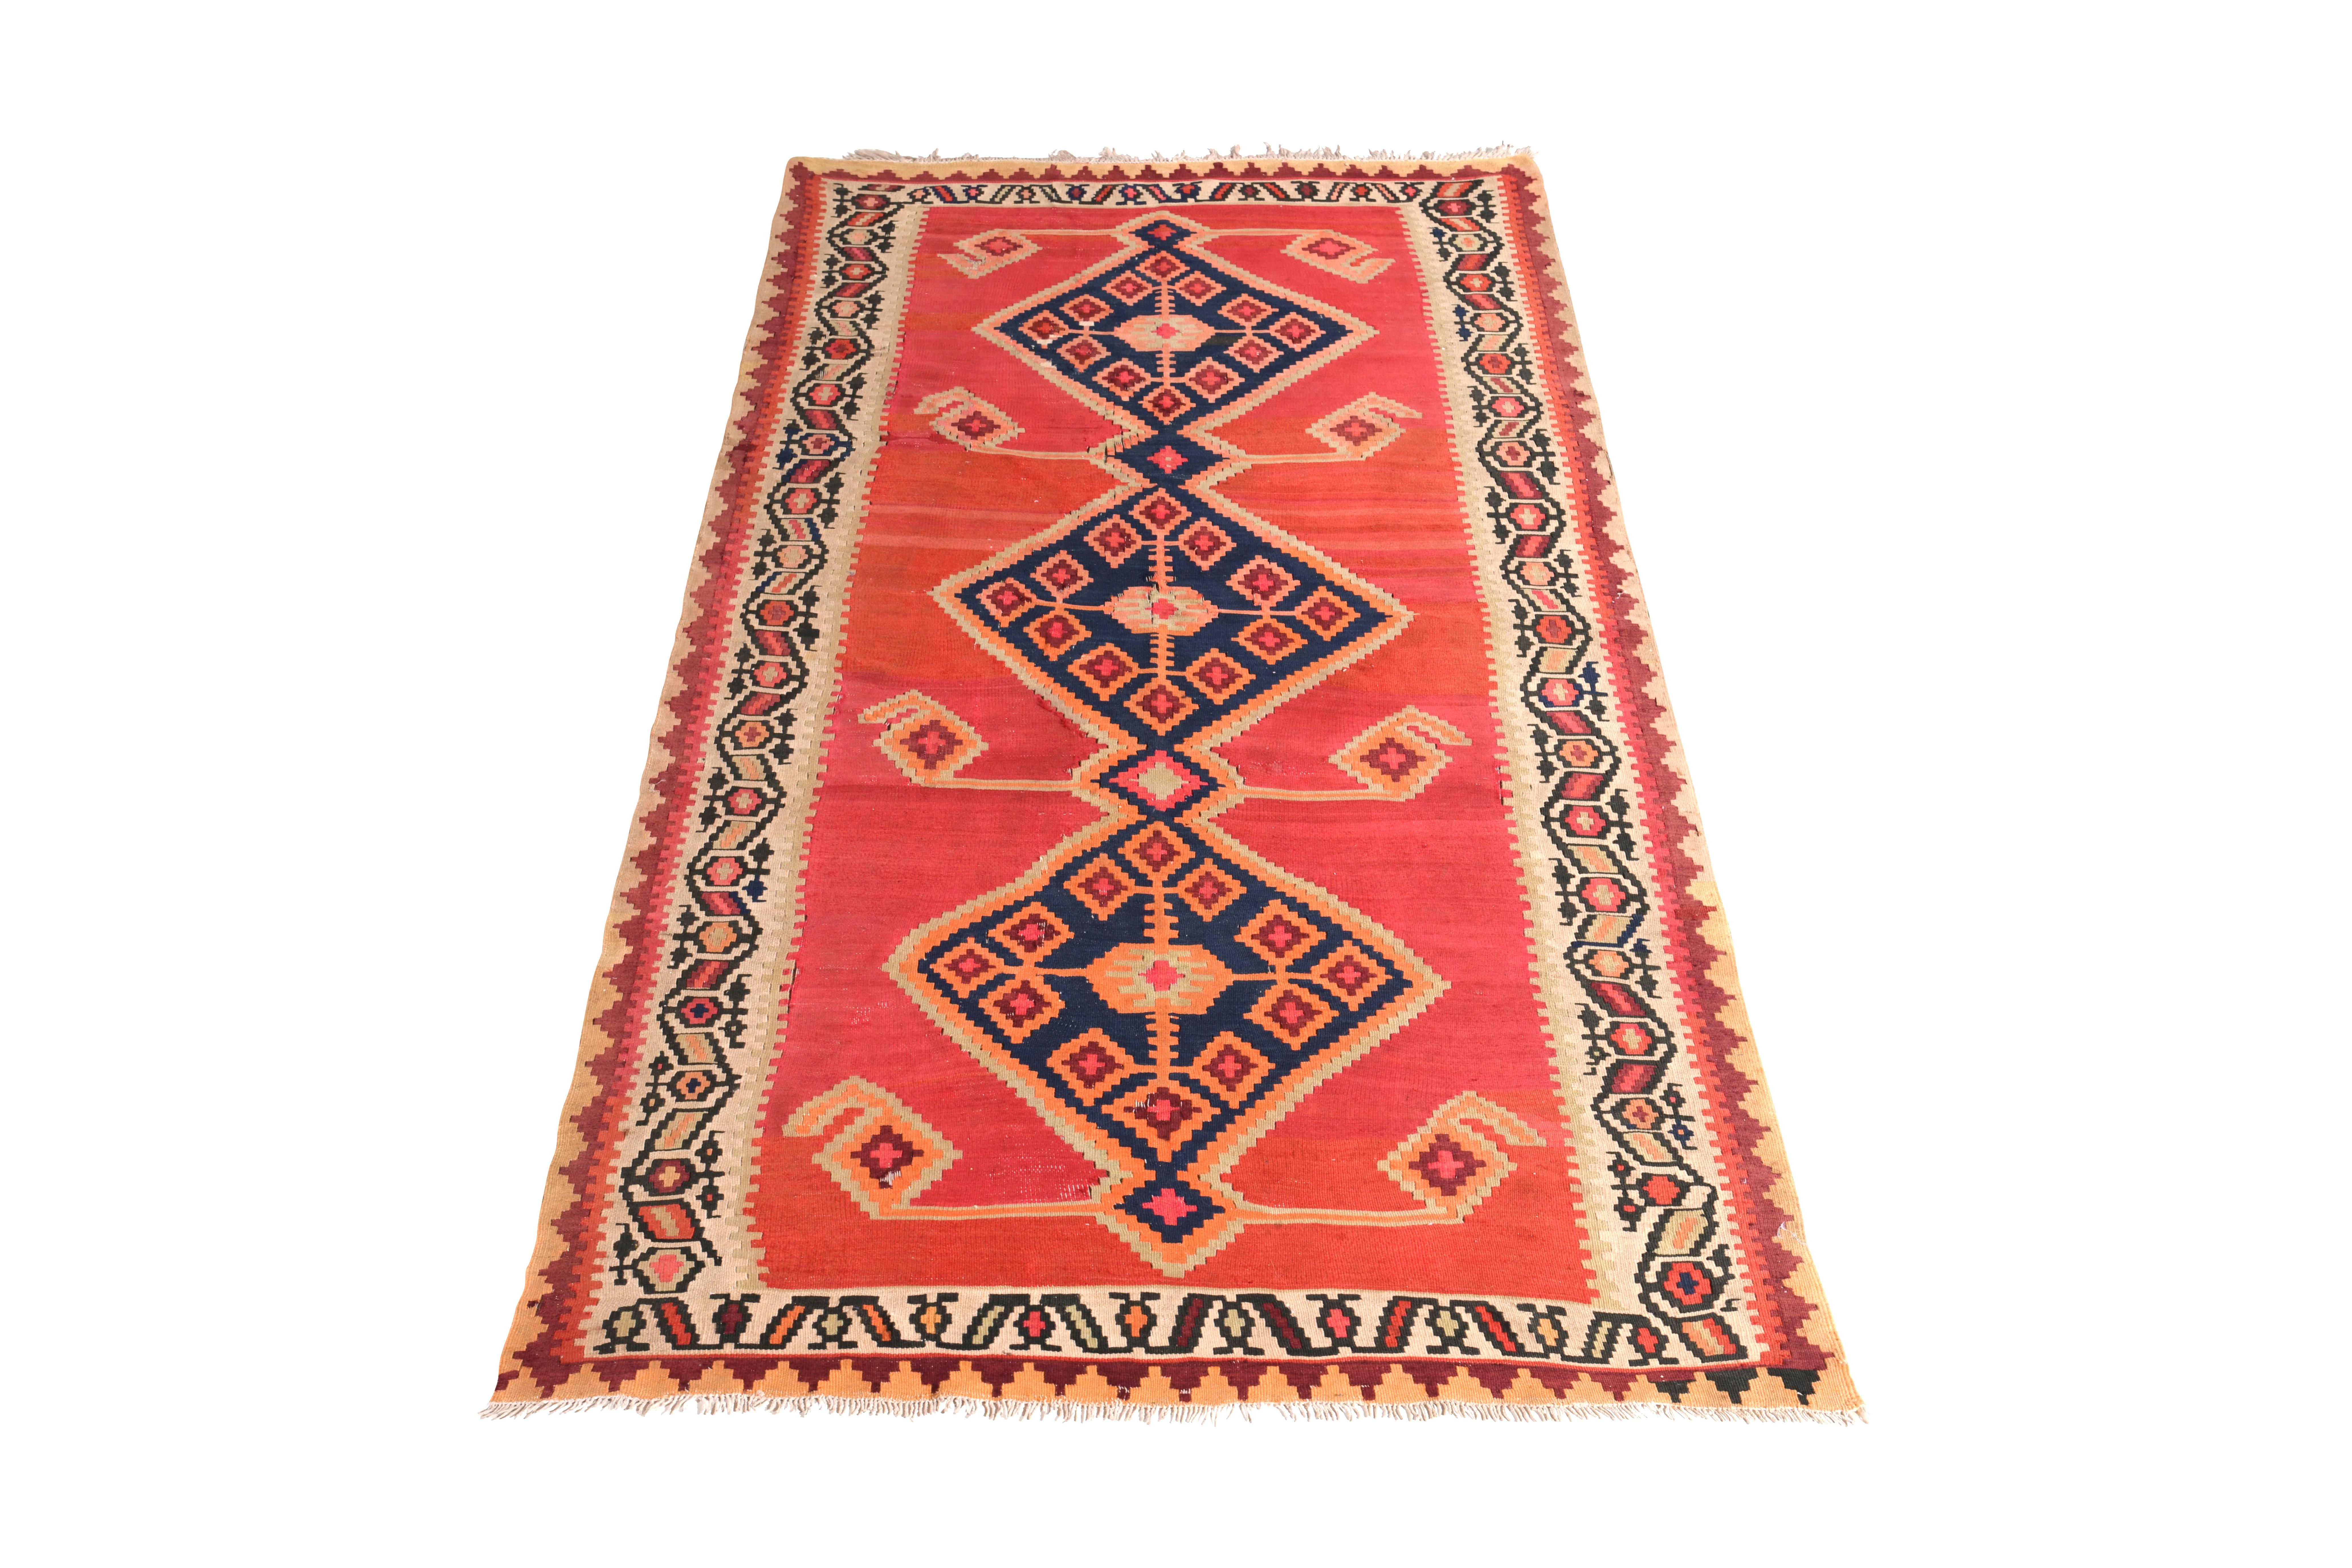 Handmade in flat-woven wool circa 1950-1960, this vintage rug is a midcentury Persian Kilim in a notably warm red colorway, both complemented and counterbalanced with a navy blue and orange medallion field pattern and forgiving hues of beige in both